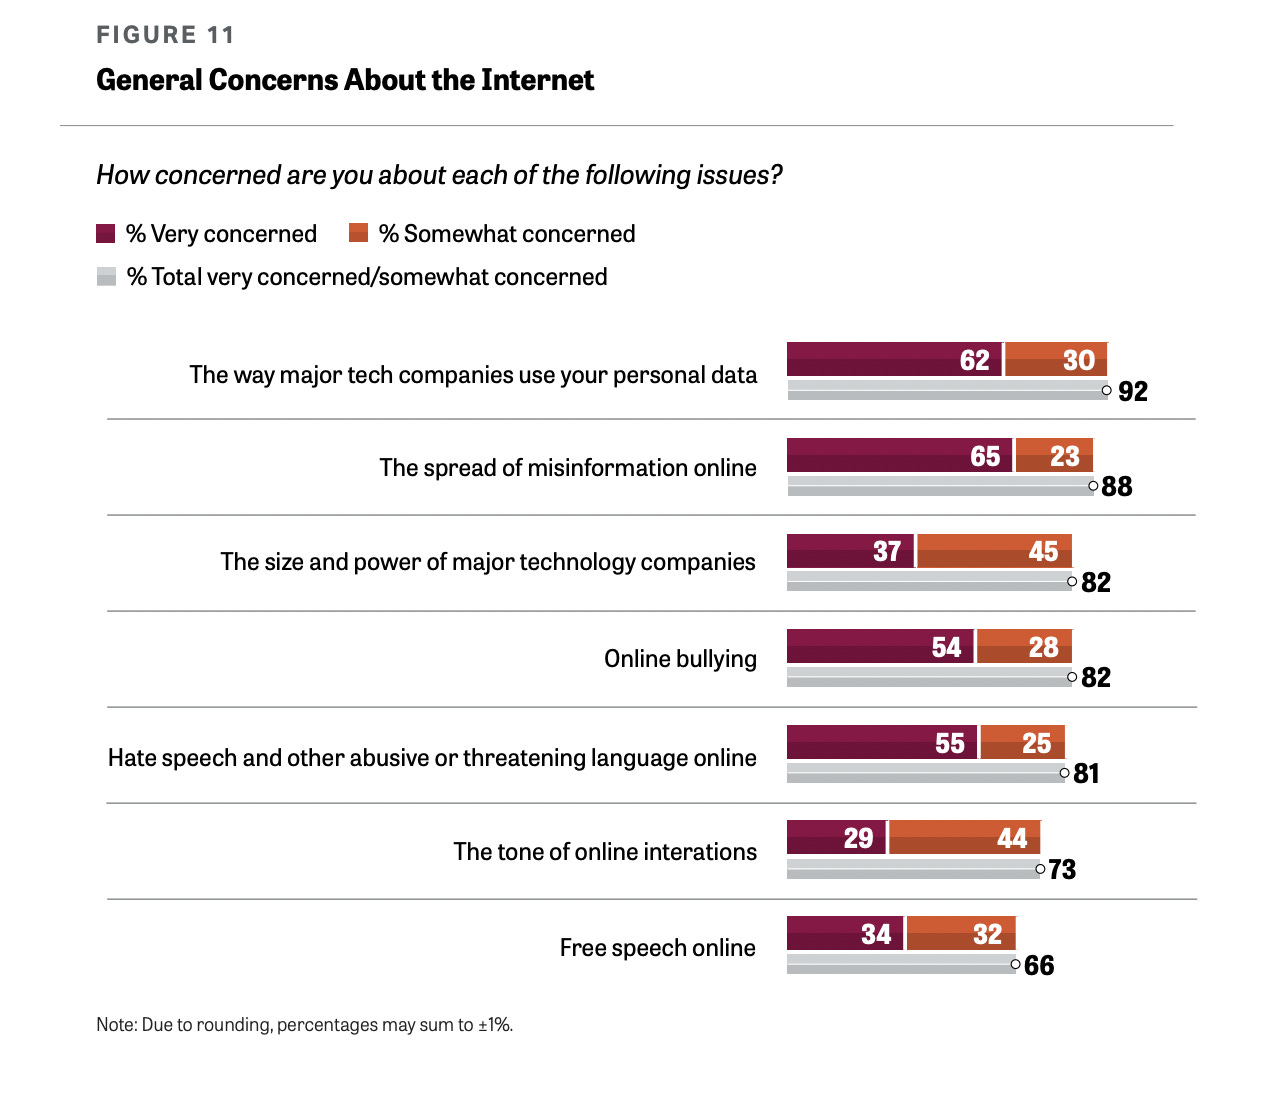 A chart with the title “General Concerns About the Internet”. The question asked is “How concerned are you about each of the following issues?” and in all cases a majority of respondents were either “very concerned” or “somewhat concerned.” Example: “The way major tech companies use your personal data” 62% very concerned, 30% somewhat concerned.